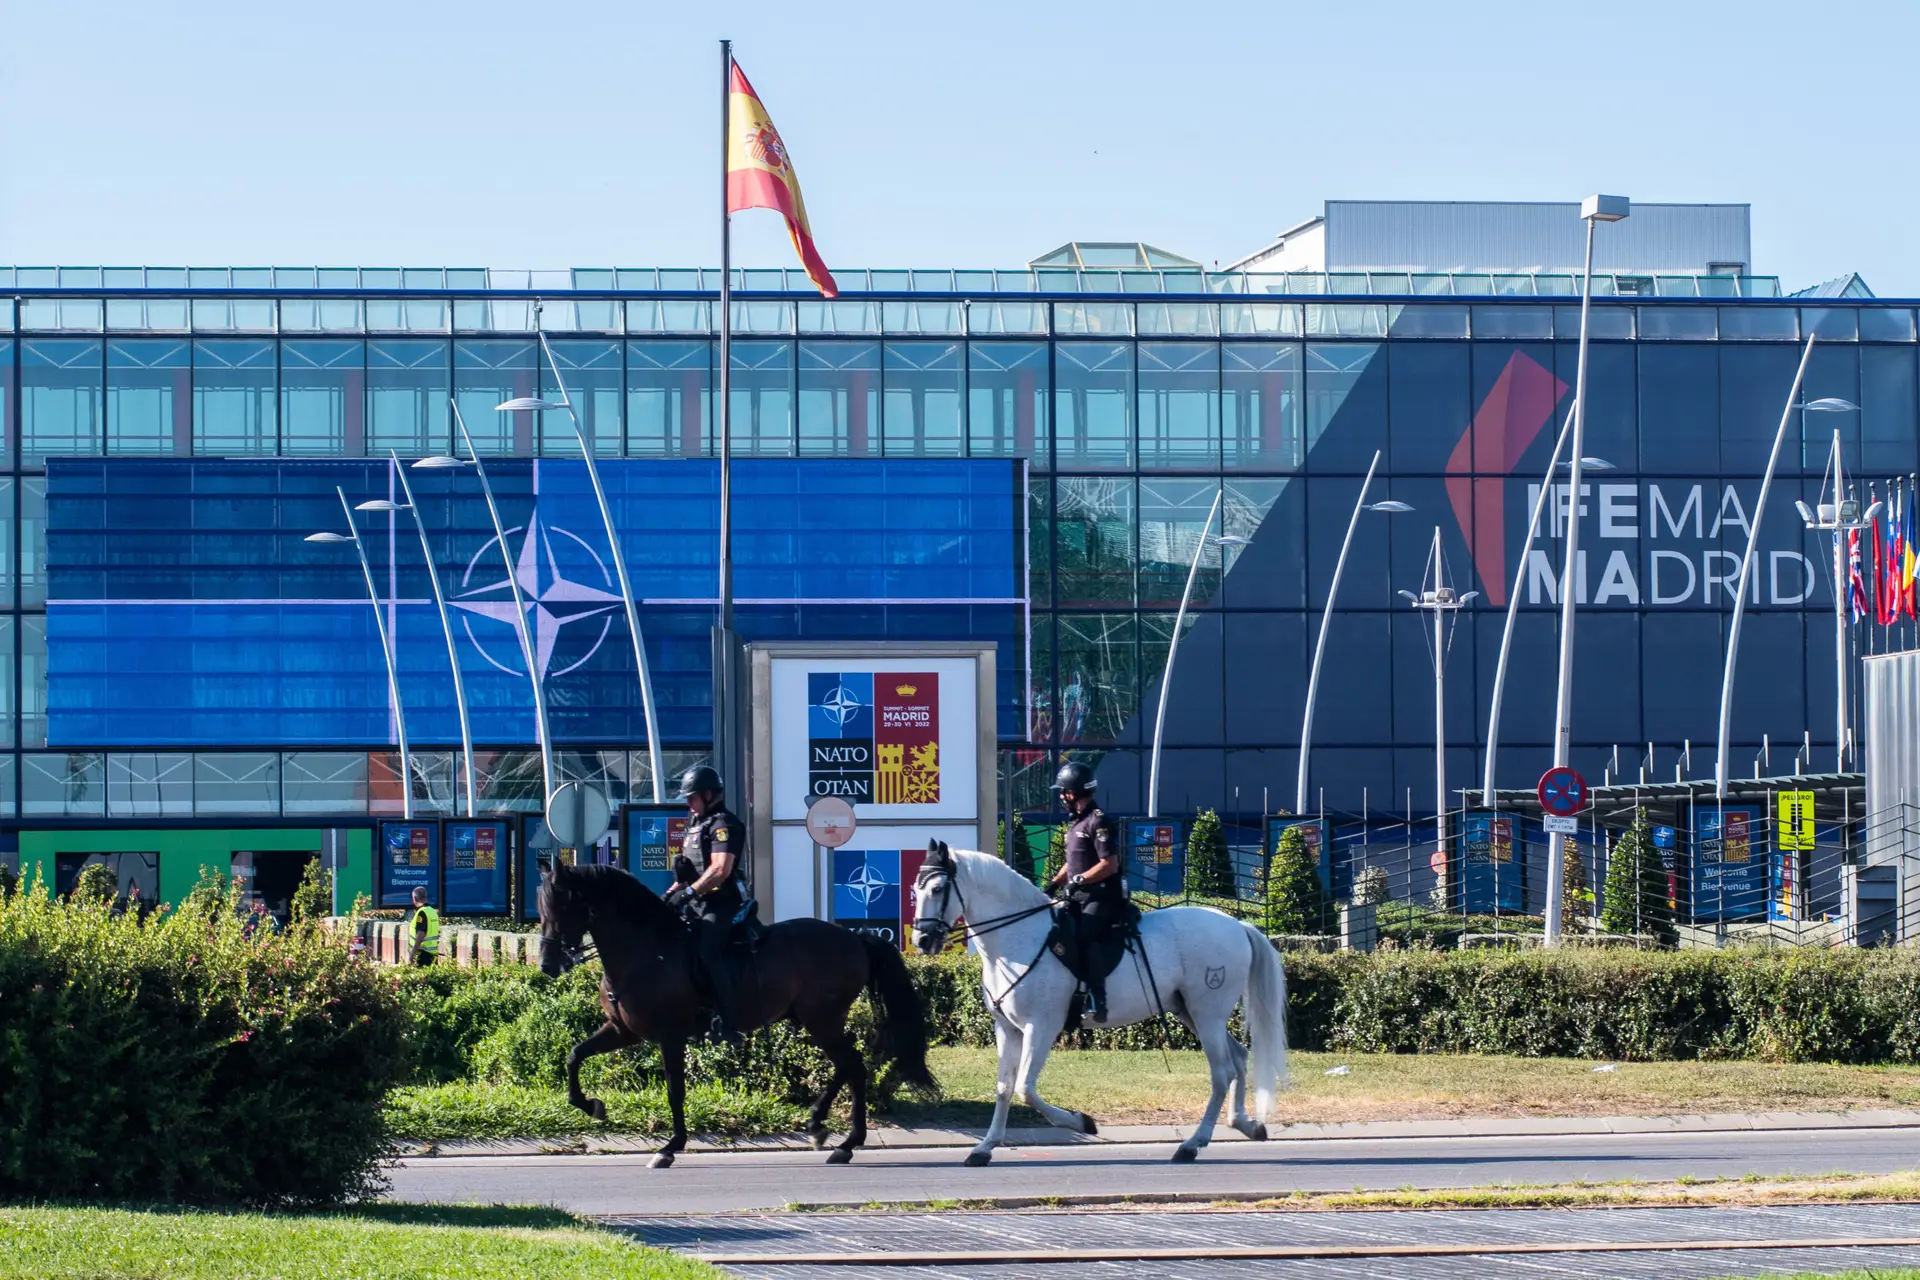 MADRID, SPAIN – 2022/06/27: Mounted police officers patrol in IFEMA where the NATO Summit will take place. Spain will host a NATO Summit in Madrid on 29th and 30th of June 2022. (Photo by Marcos del Mazo/LightRocket via Getty Images)